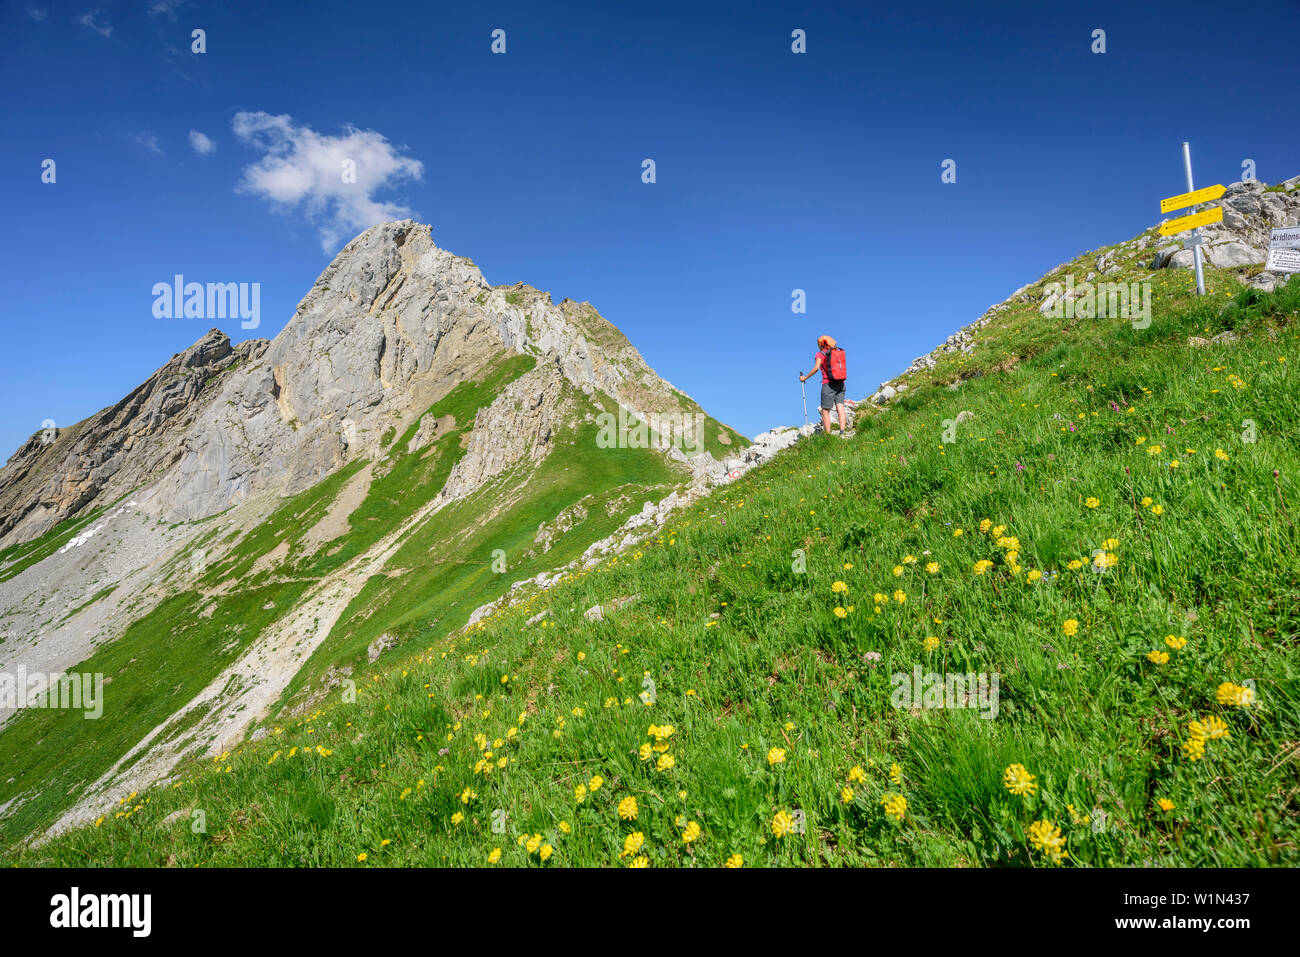 Woman hiking through meadow with flowers, rock spire in background, Lechtal Alps, Tyrol, Austria Stock Photo